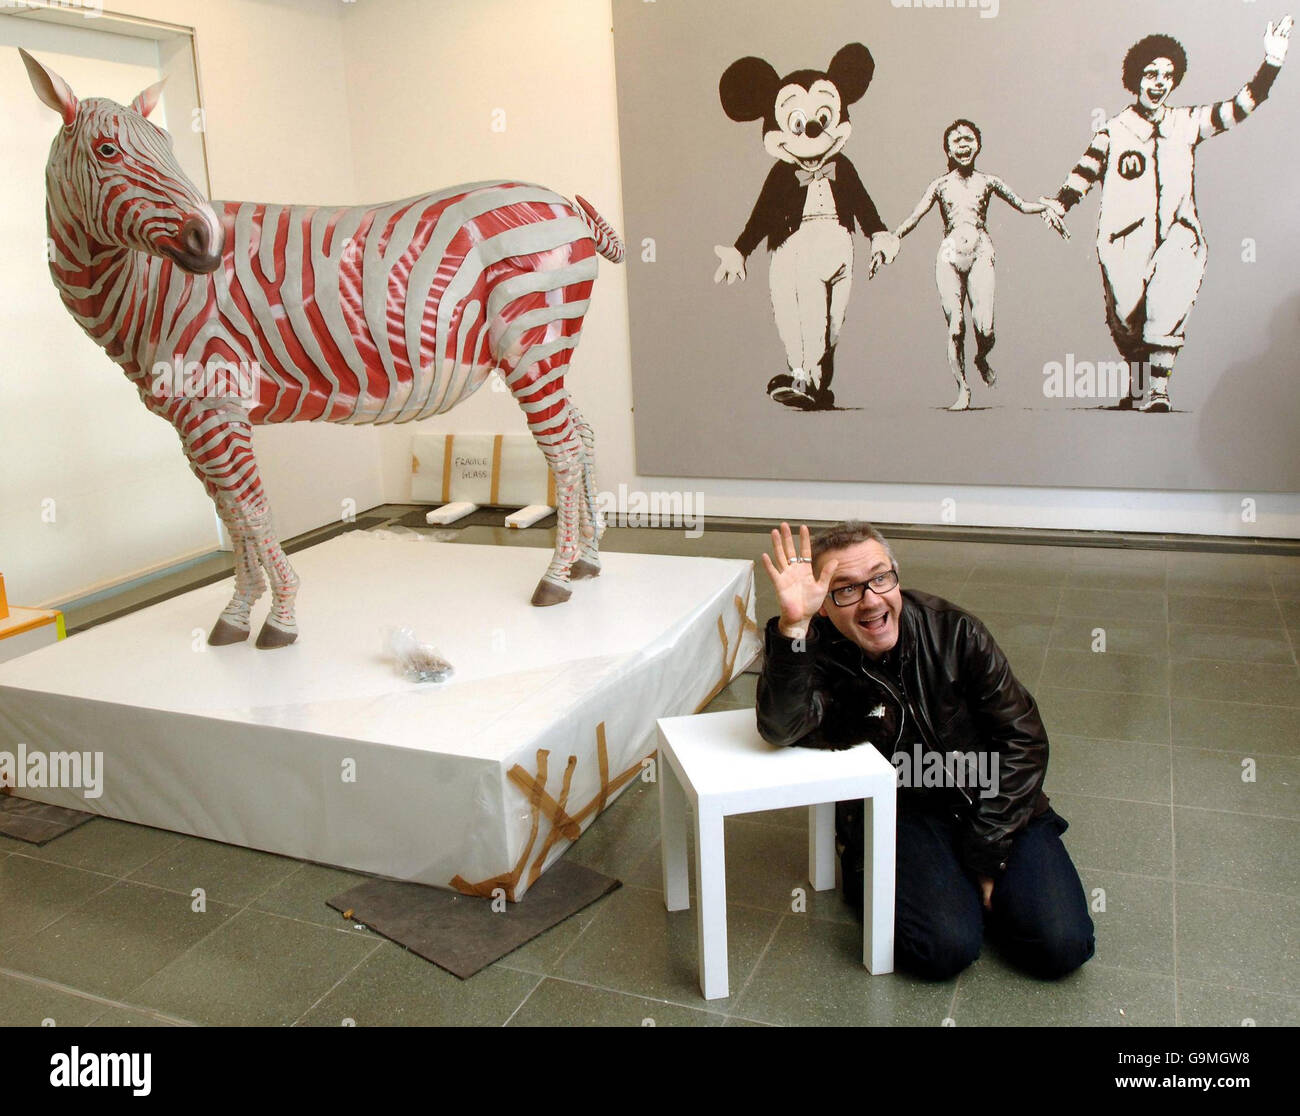 British artist Damien Hirst with some works from 'murderme', his personal contemporary art collection, which he is exhibiting at London's Serpentine Gallery from tomorrow. He is seated with, left, Stripped by Michael Joo and Can't Beat the Feeling by Bansky. Stock Photo